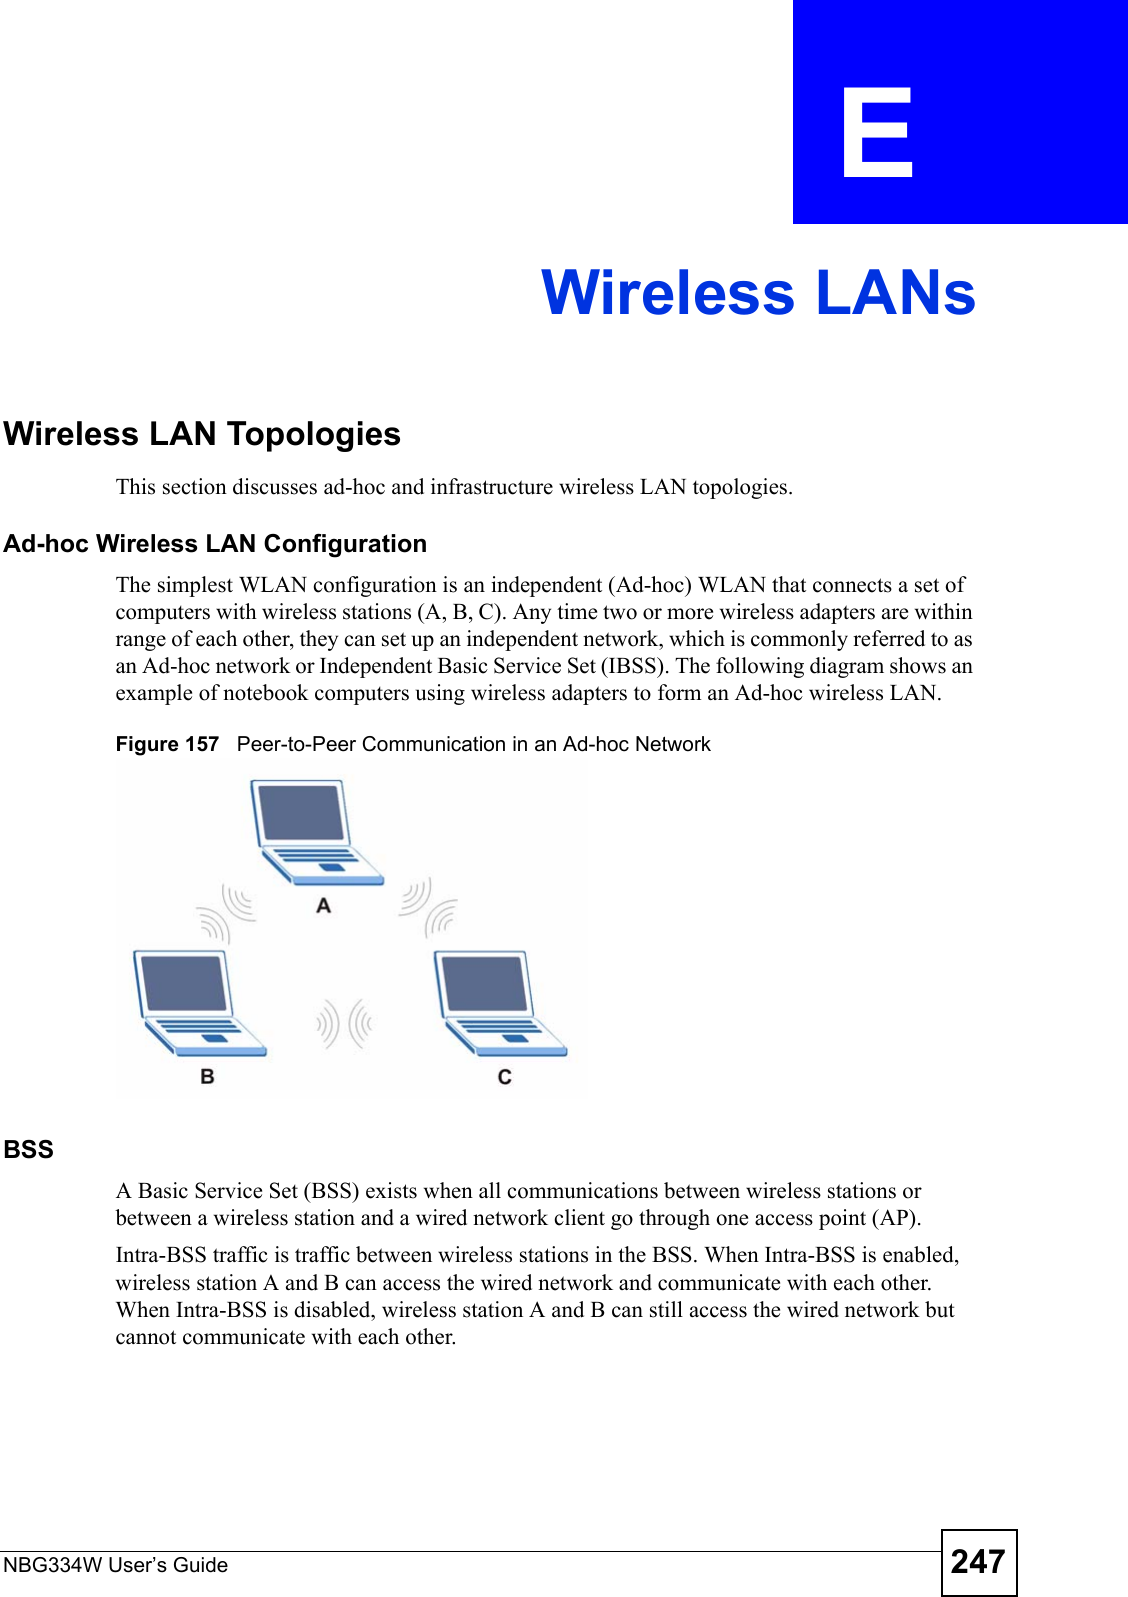 NBG334W User’s Guide 247APPENDIX  E Wireless LANsWireless LAN TopologiesThis section discusses ad-hoc and infrastructure wireless LAN topologies.Ad-hoc Wireless LAN ConfigurationThe simplest WLAN configuration is an independent (Ad-hoc) WLAN that connects a set of computers with wireless stations (A, B, C). Any time two or more wireless adapters are within range of each other, they can set up an independent network, which is commonly referred to as an Ad-hoc network or Independent Basic Service Set (IBSS). The following diagram shows an example of notebook computers using wireless adapters to form an Ad-hoc wireless LAN. Figure 157   Peer-to-Peer Communication in an Ad-hoc NetworkBSSA Basic Service Set (BSS) exists when all communications between wireless stations or between a wireless station and a wired network client go through one access point (AP). Intra-BSS traffic is traffic between wireless stations in the BSS. When Intra-BSS is enabled, wireless station A and B can access the wired network and communicate with each other. When Intra-BSS is disabled, wireless station A and B can still access the wired network but cannot communicate with each other.